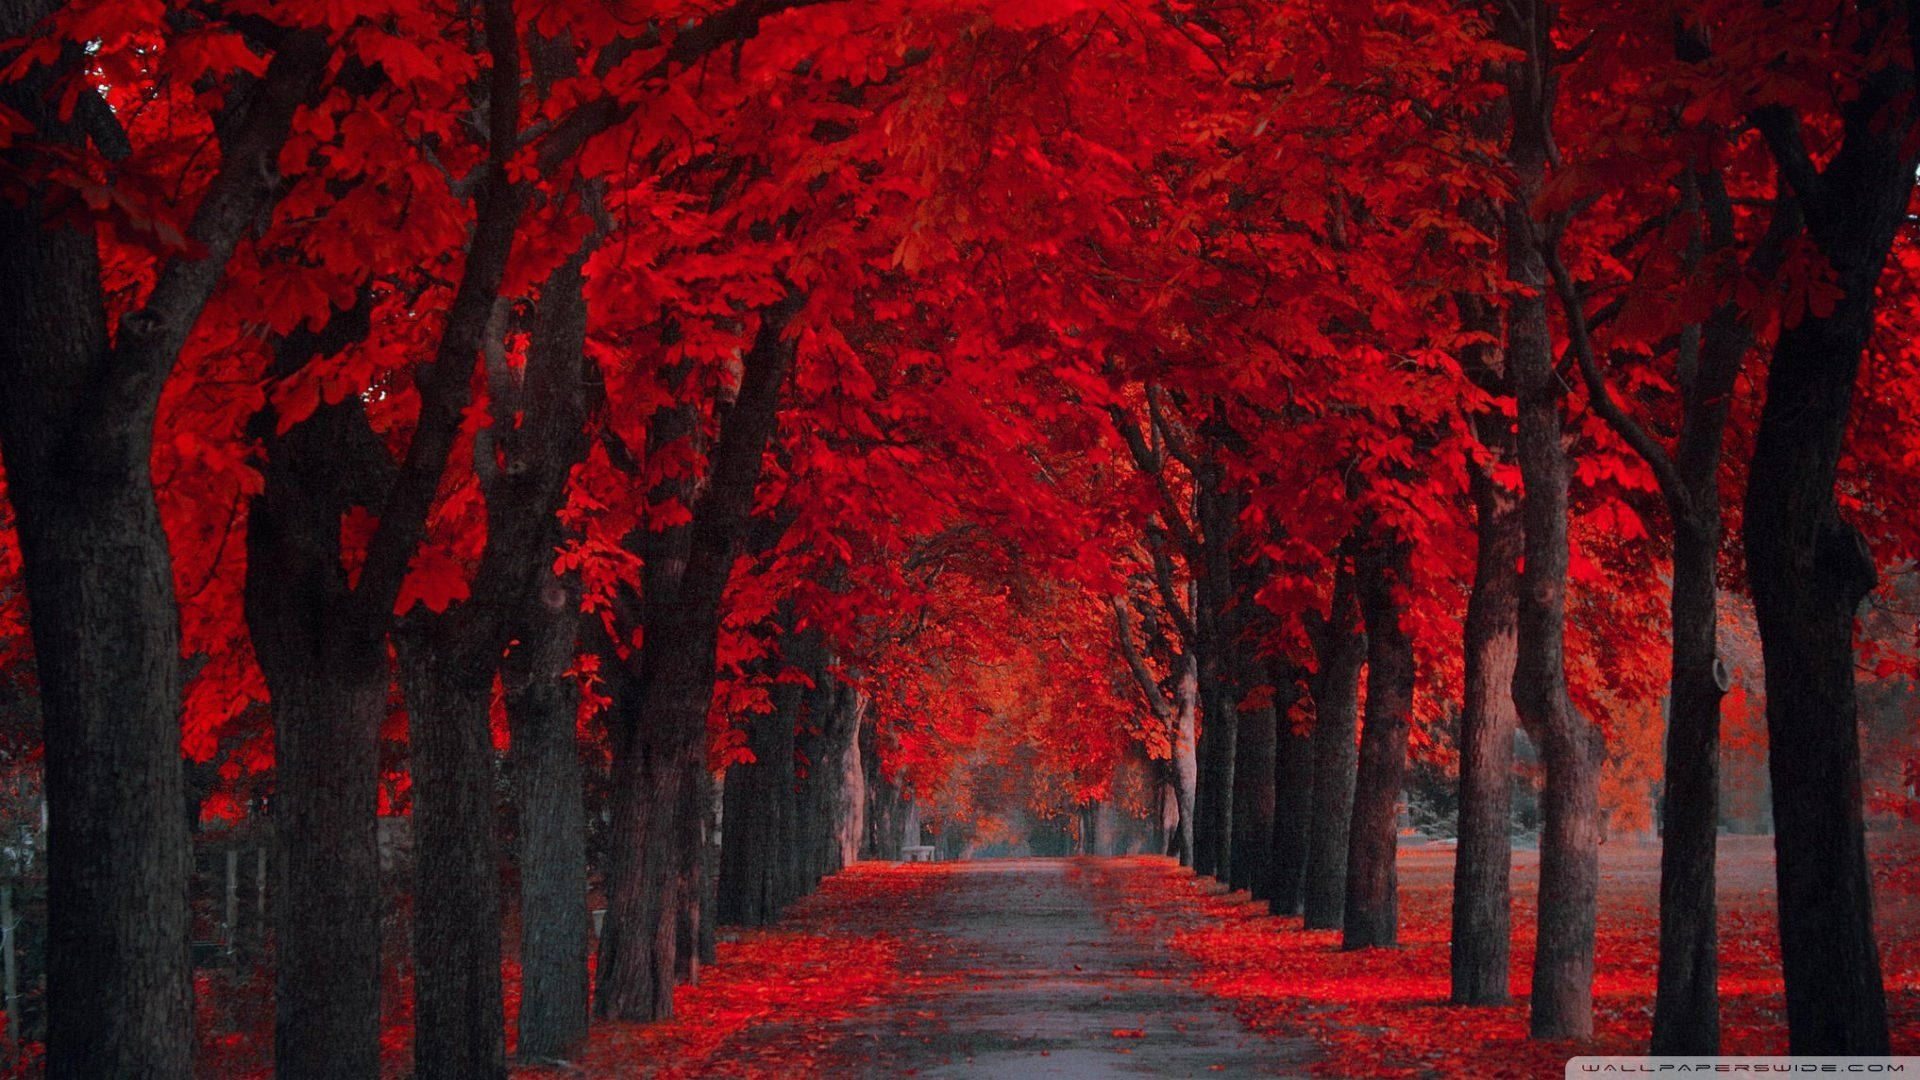 Bright red trees contrast with the descending evening sky Wallpaper